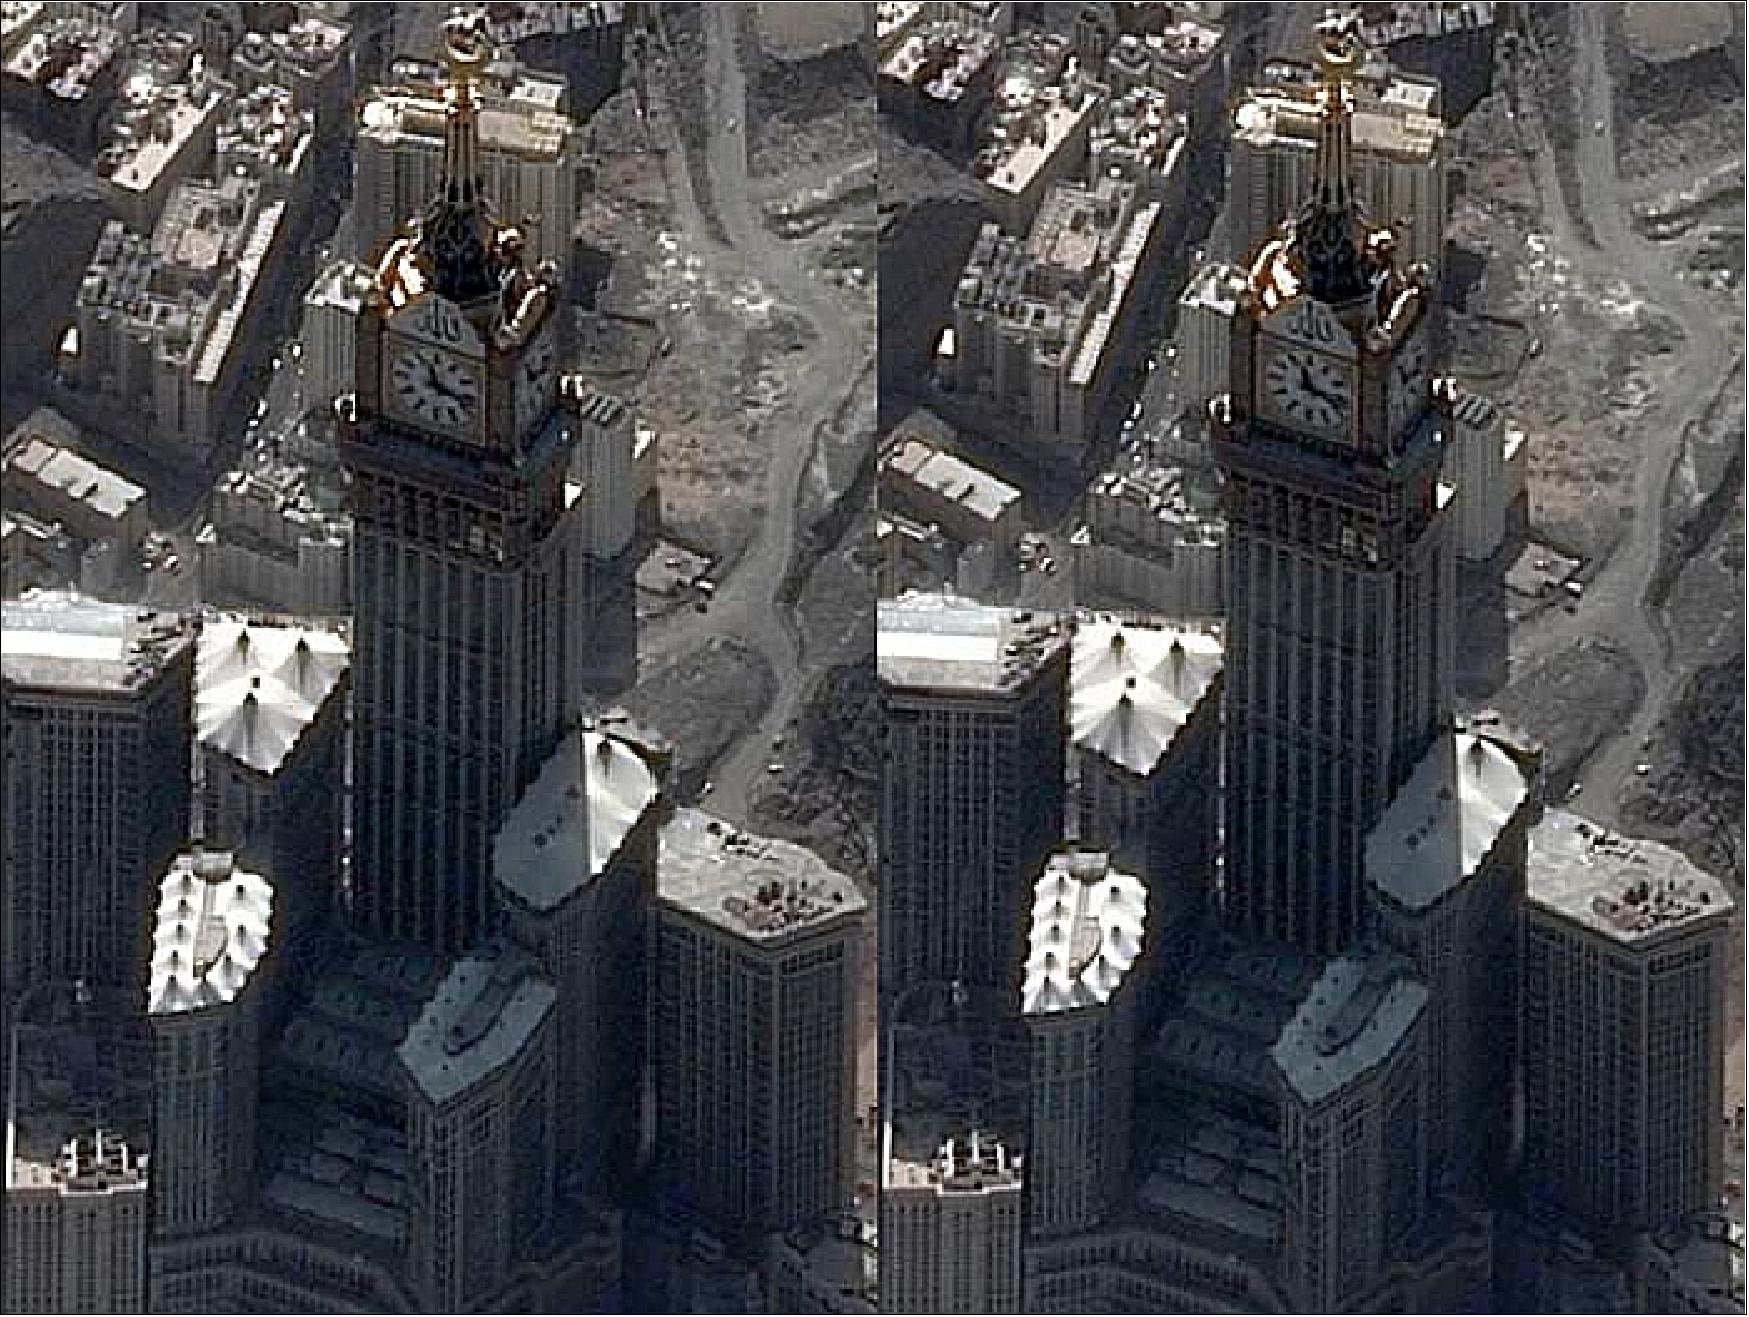 Figure 27: Three pictures on the Mecca ”tower clock” acquired by Pleiades 1B every 90 s in a single pass to see the minutes needle moving ! (image credit: CNES)